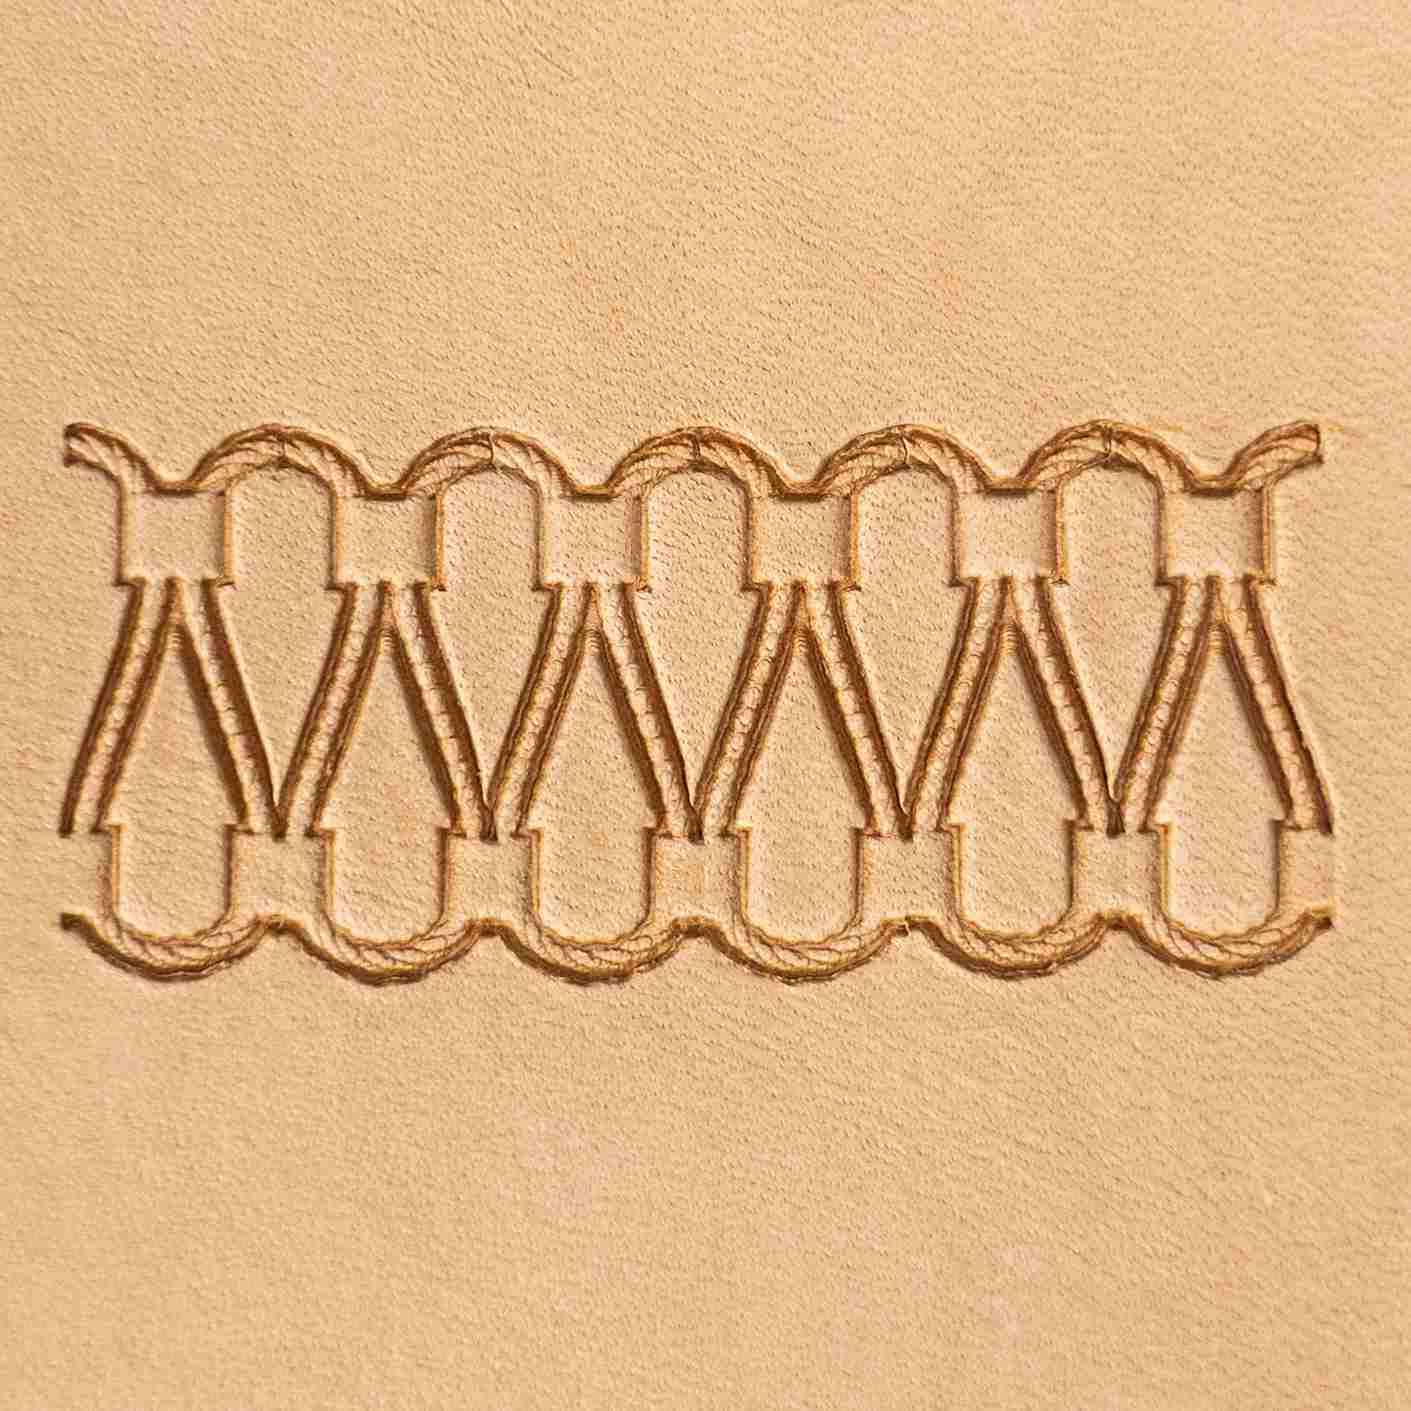 LT097 Premium Leather Stamping Tools for Professional Crafters-20x8mm size